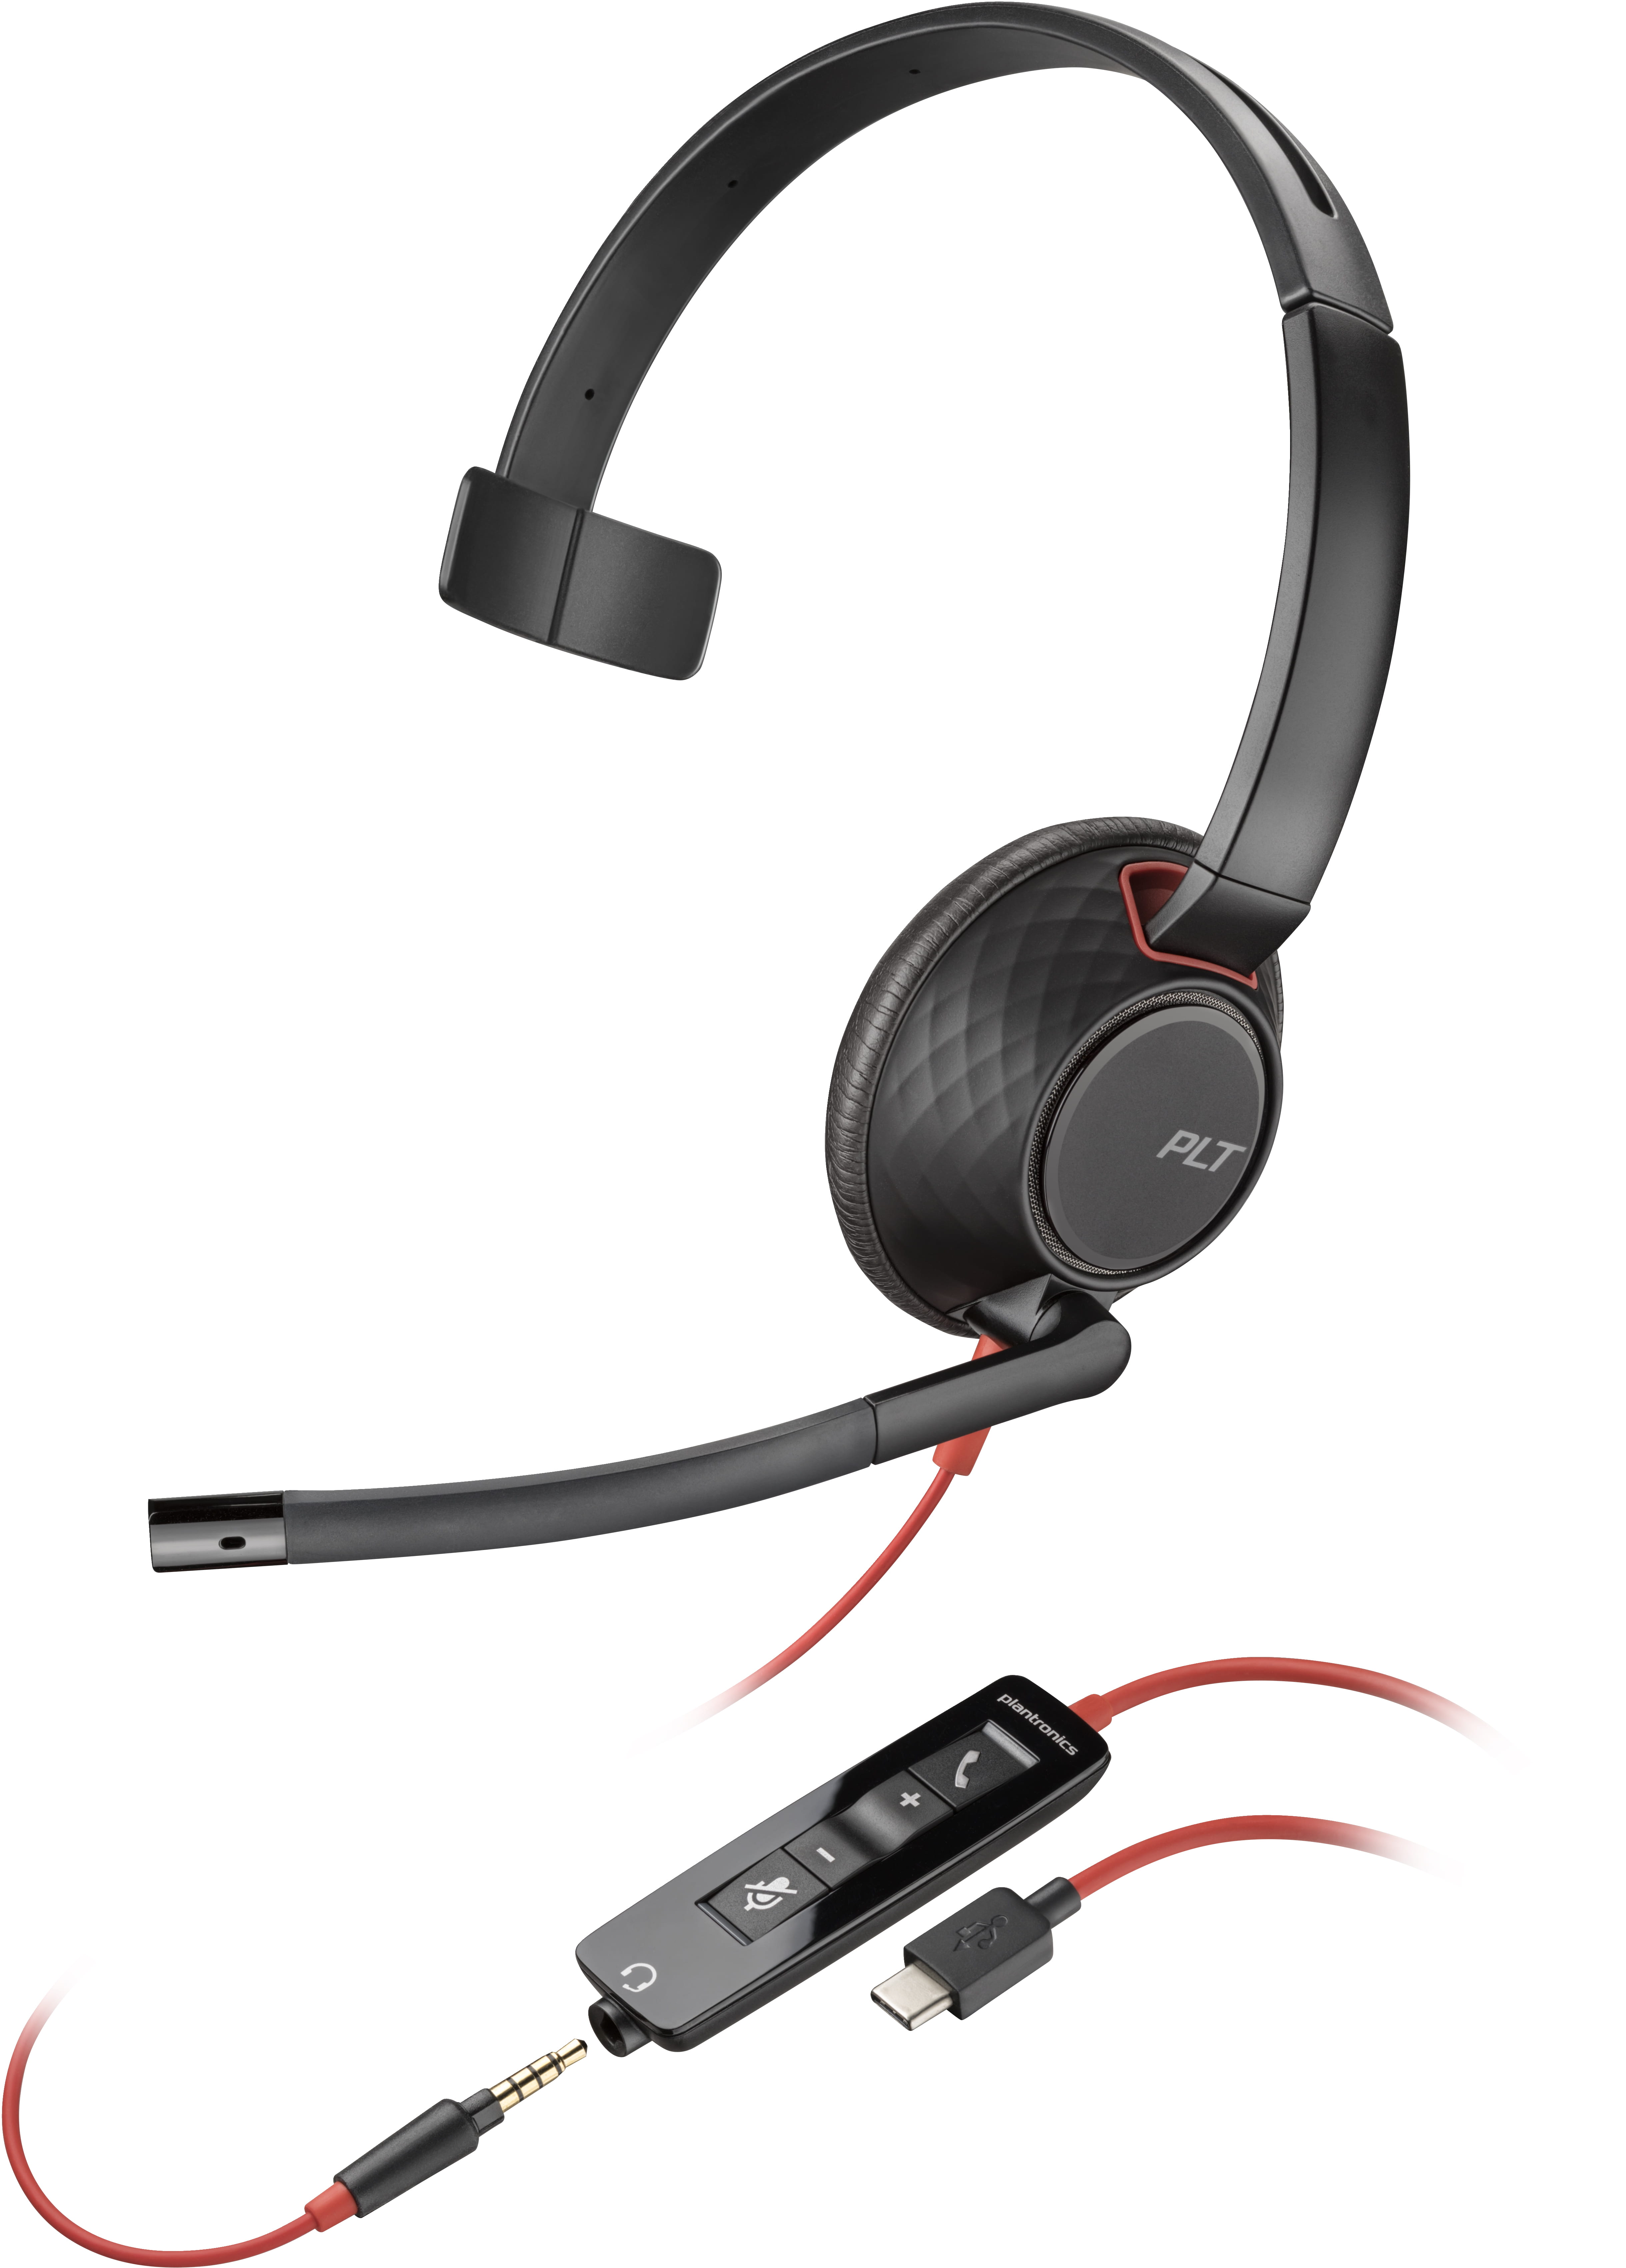 HP Poly Blackwire 5210 - Blackwire 5200 series - Headset